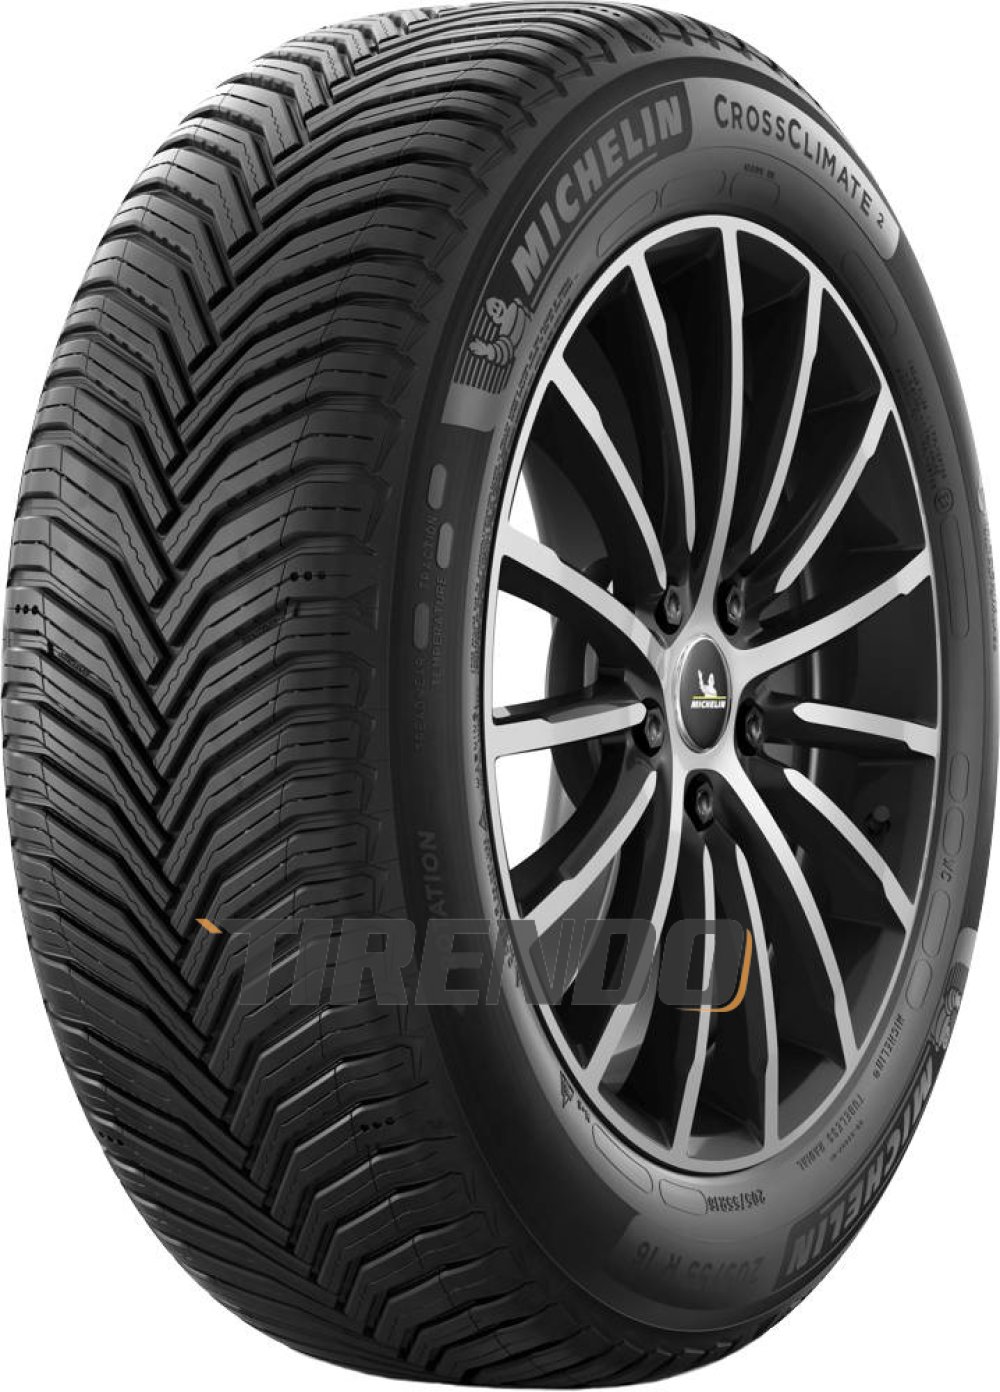 Image of Michelin CrossClimate 2 ( 245/40 R19 98Y XL )